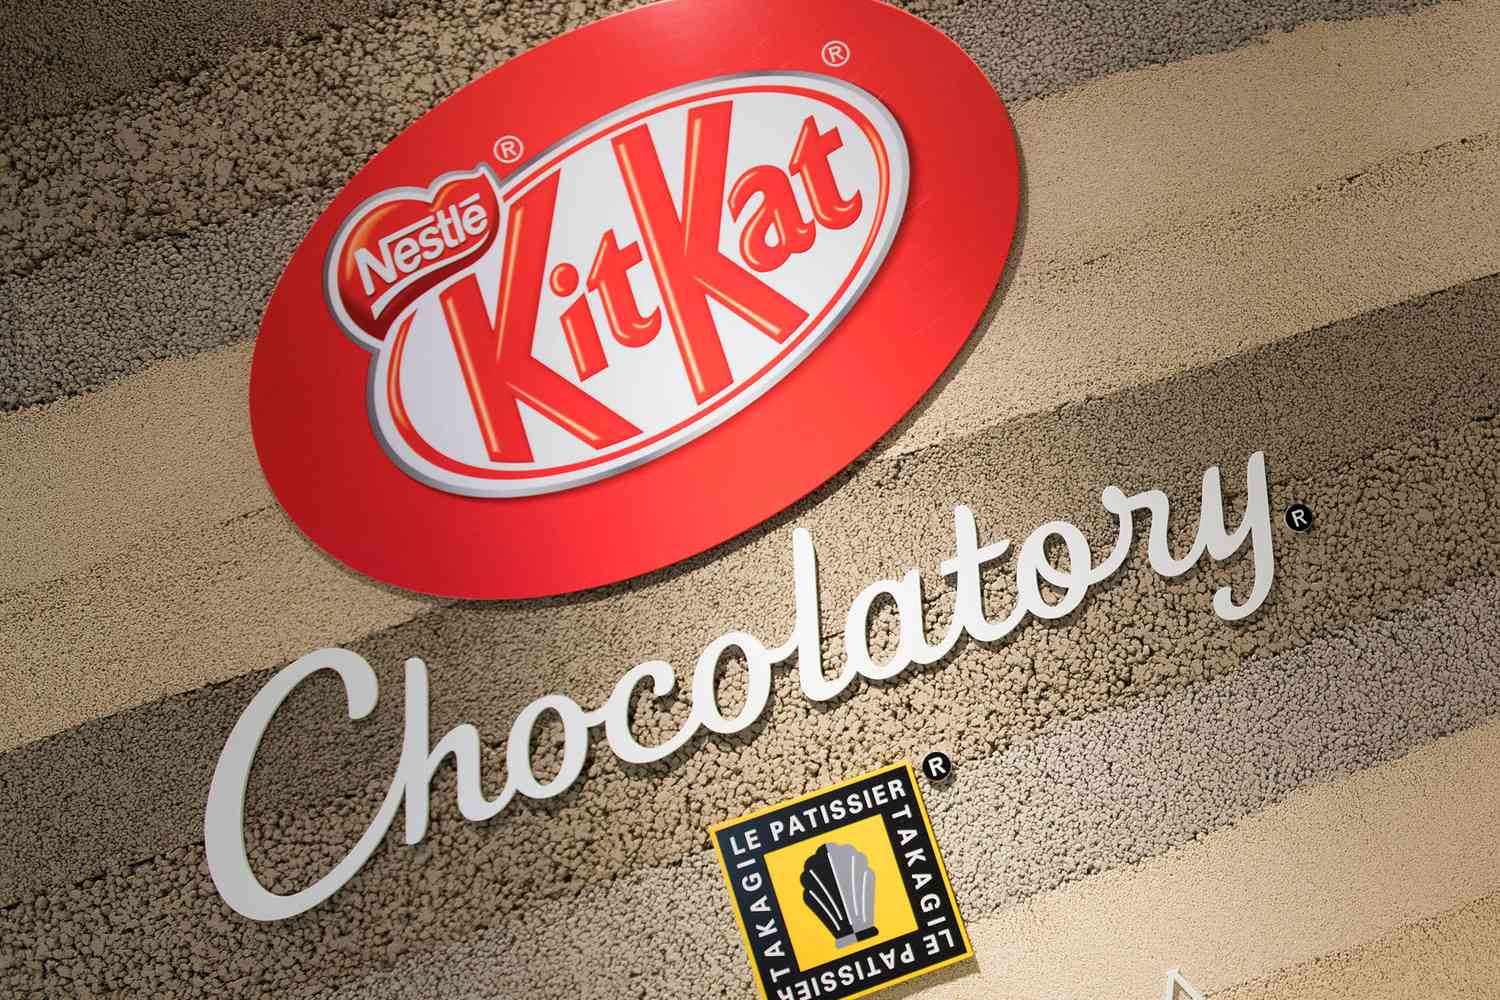 Kit Kat Releases Whisky Barrel-Aged Chocolate Bar in Japan